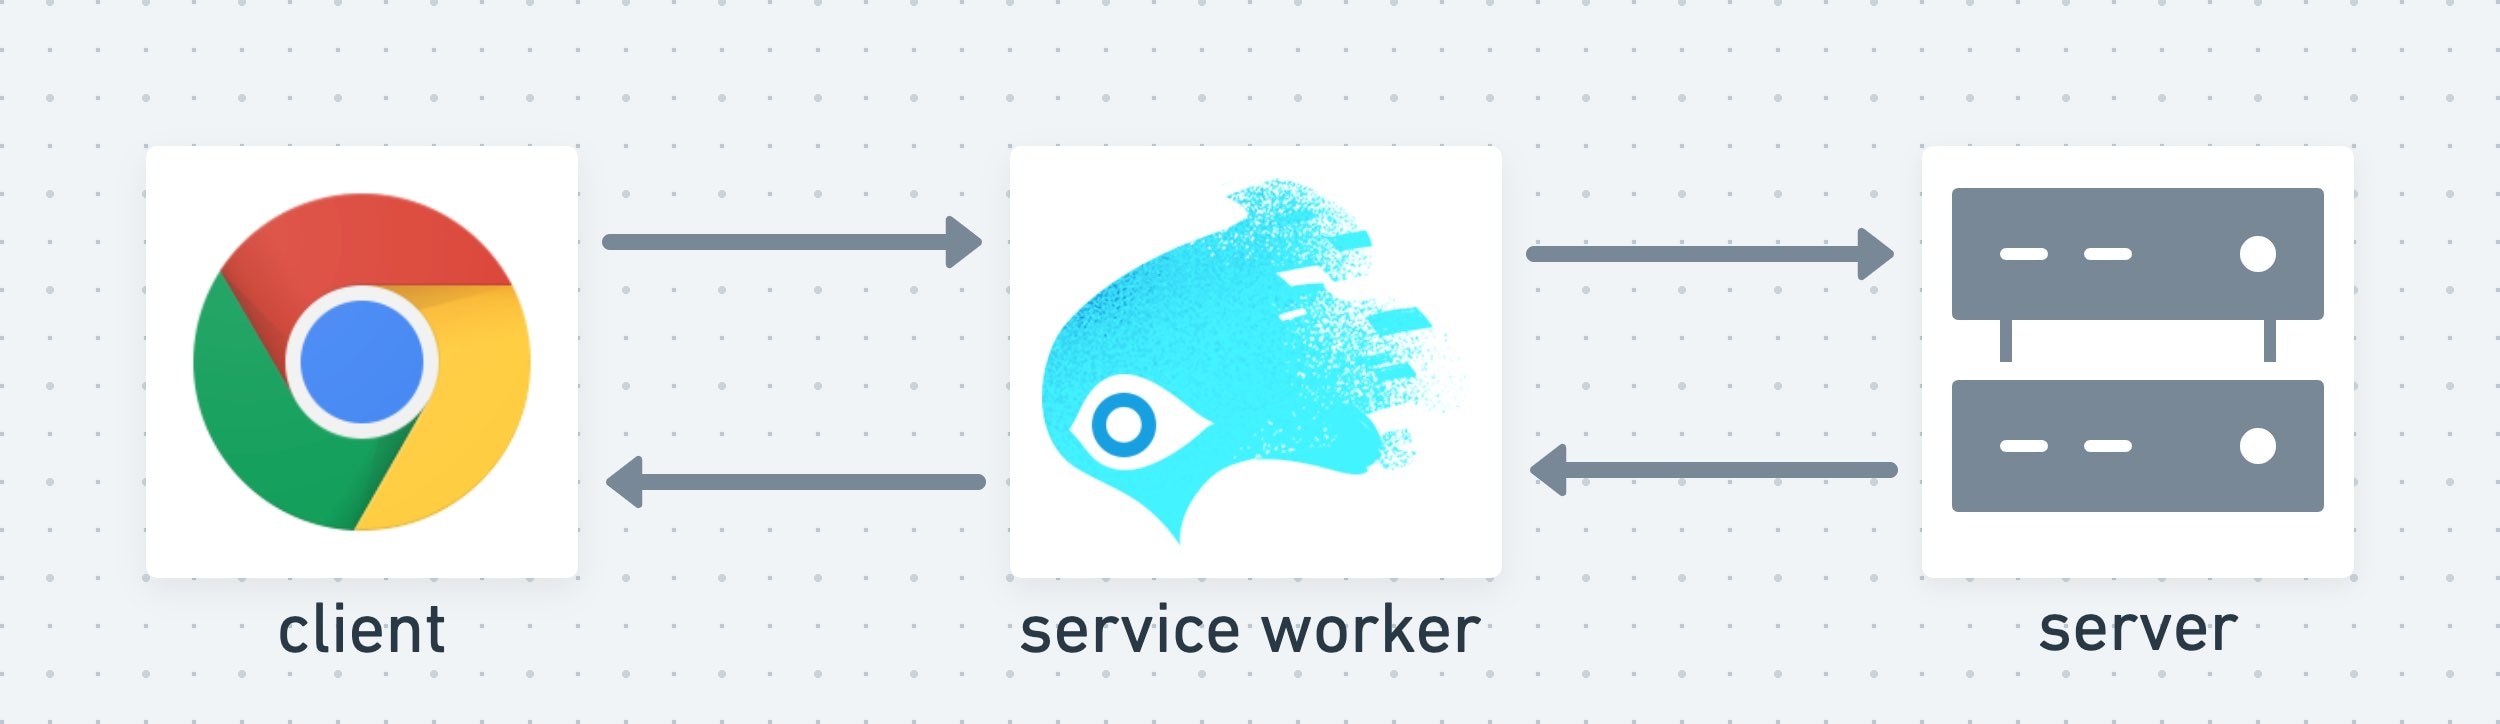 A service worker acts as a middle layer between the client and the server